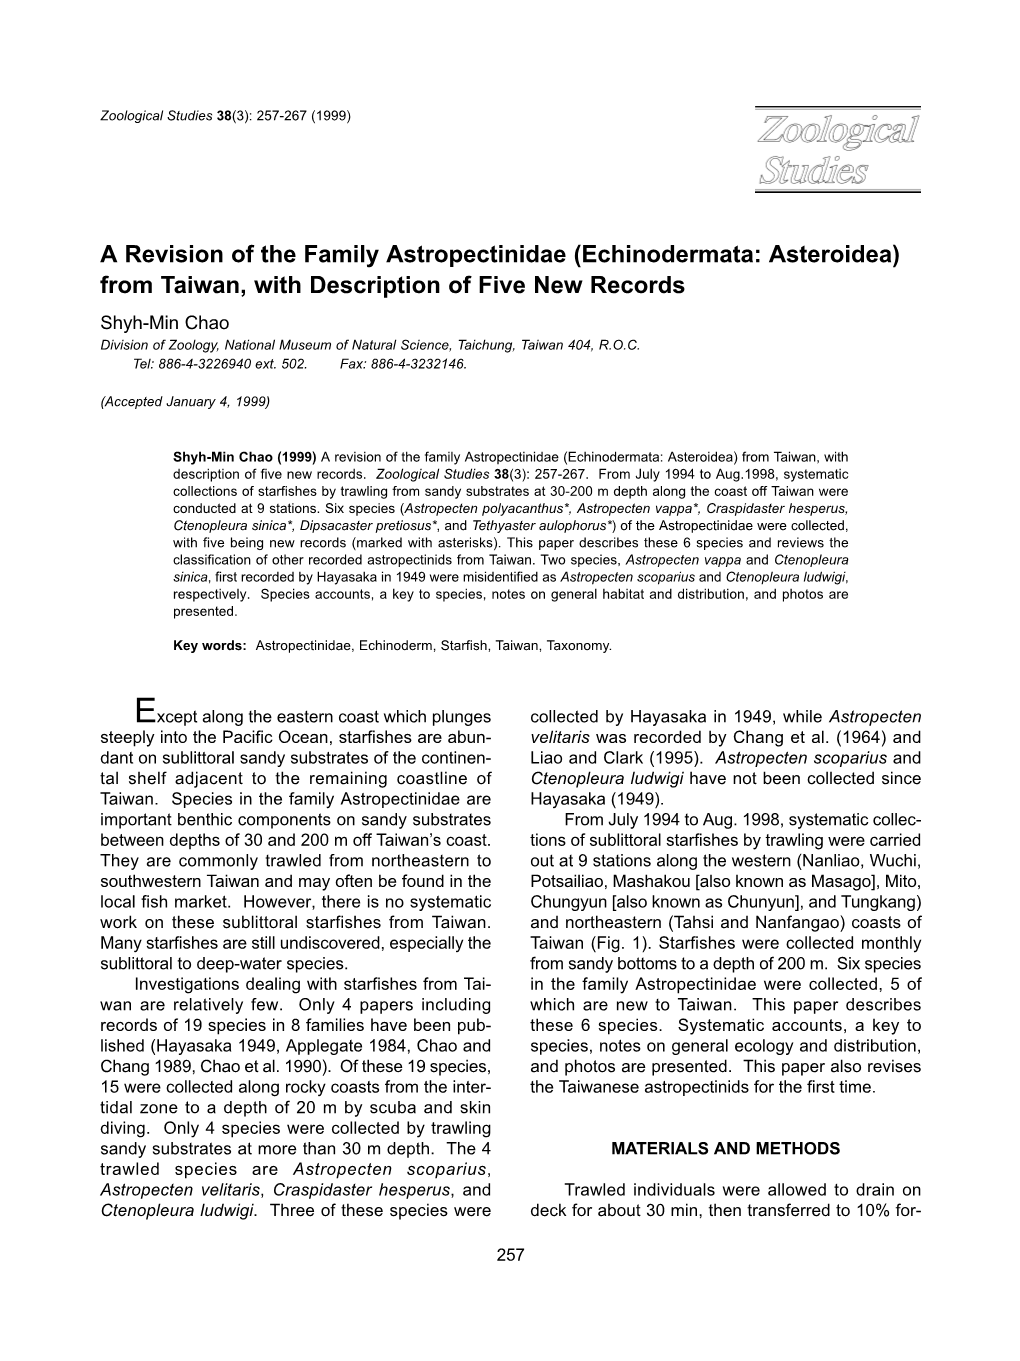 A Revision of the Family Astropectinidae